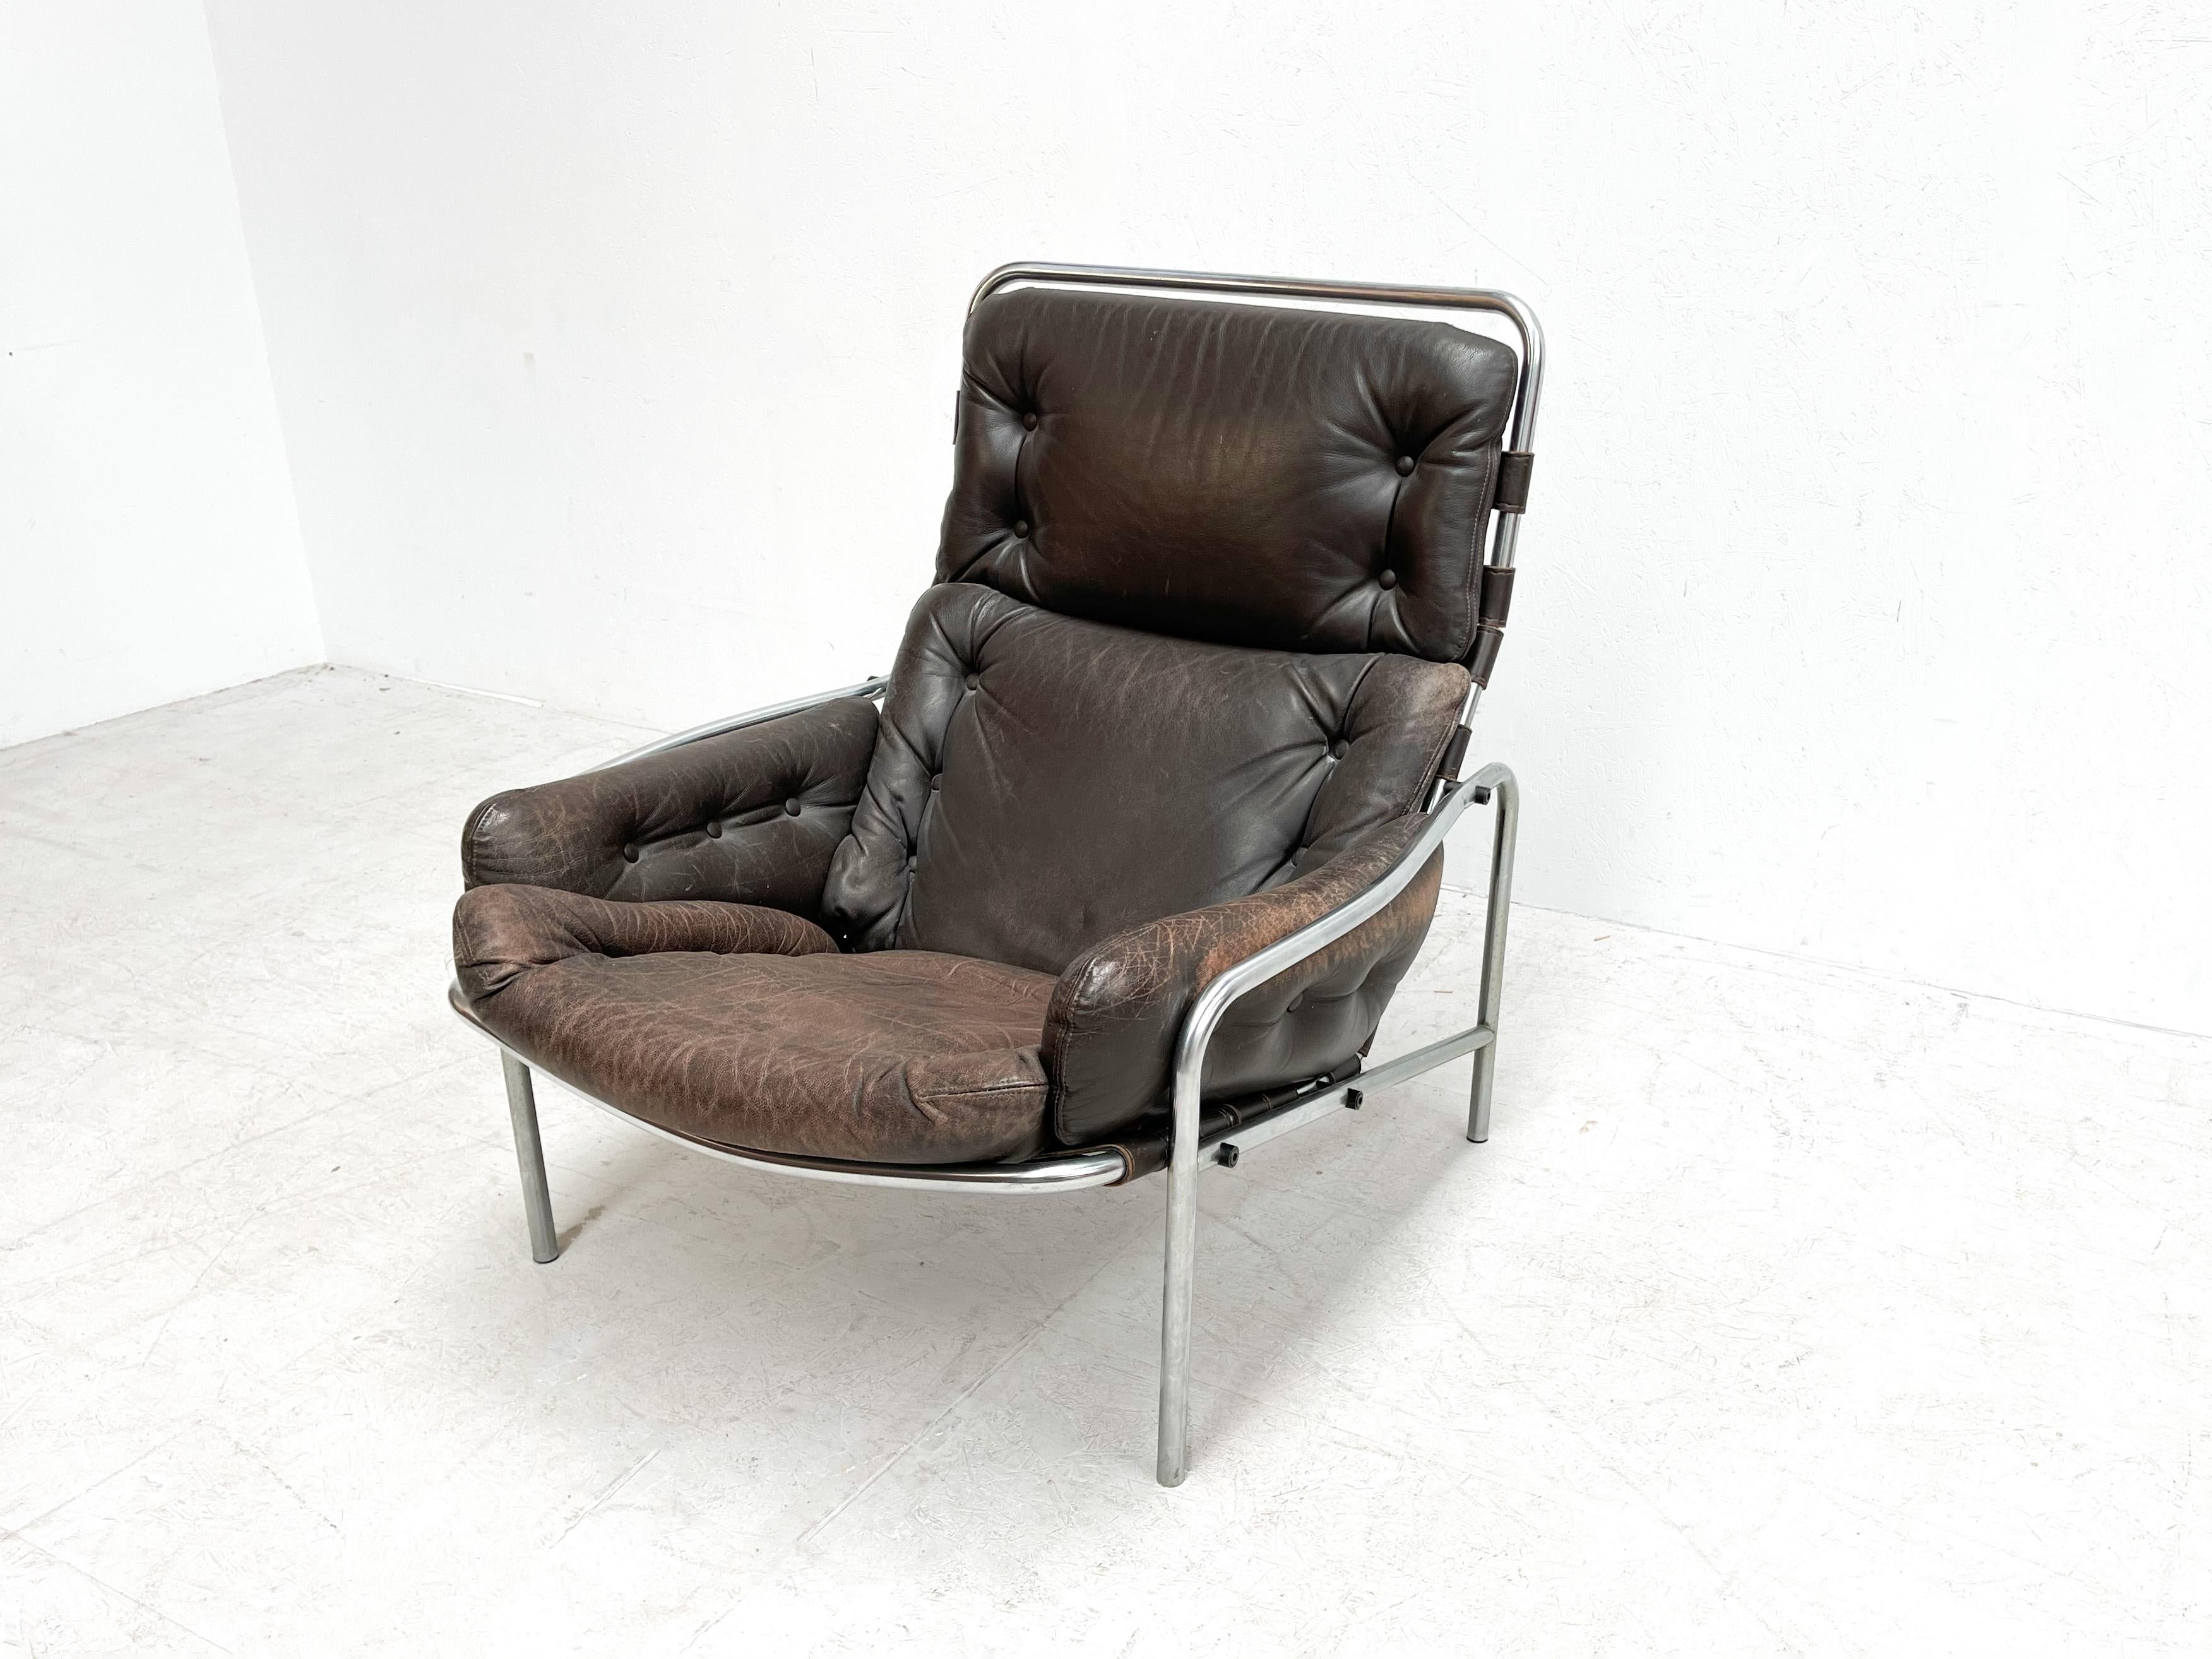 Very nice Dutch Lounge chair by 1 of the most famous designers of the Netherlands Martin Visser. This highback lounge chair has a very nice patinated brown leather seat. This model is called the Osaka chair because it was exhibited at the world